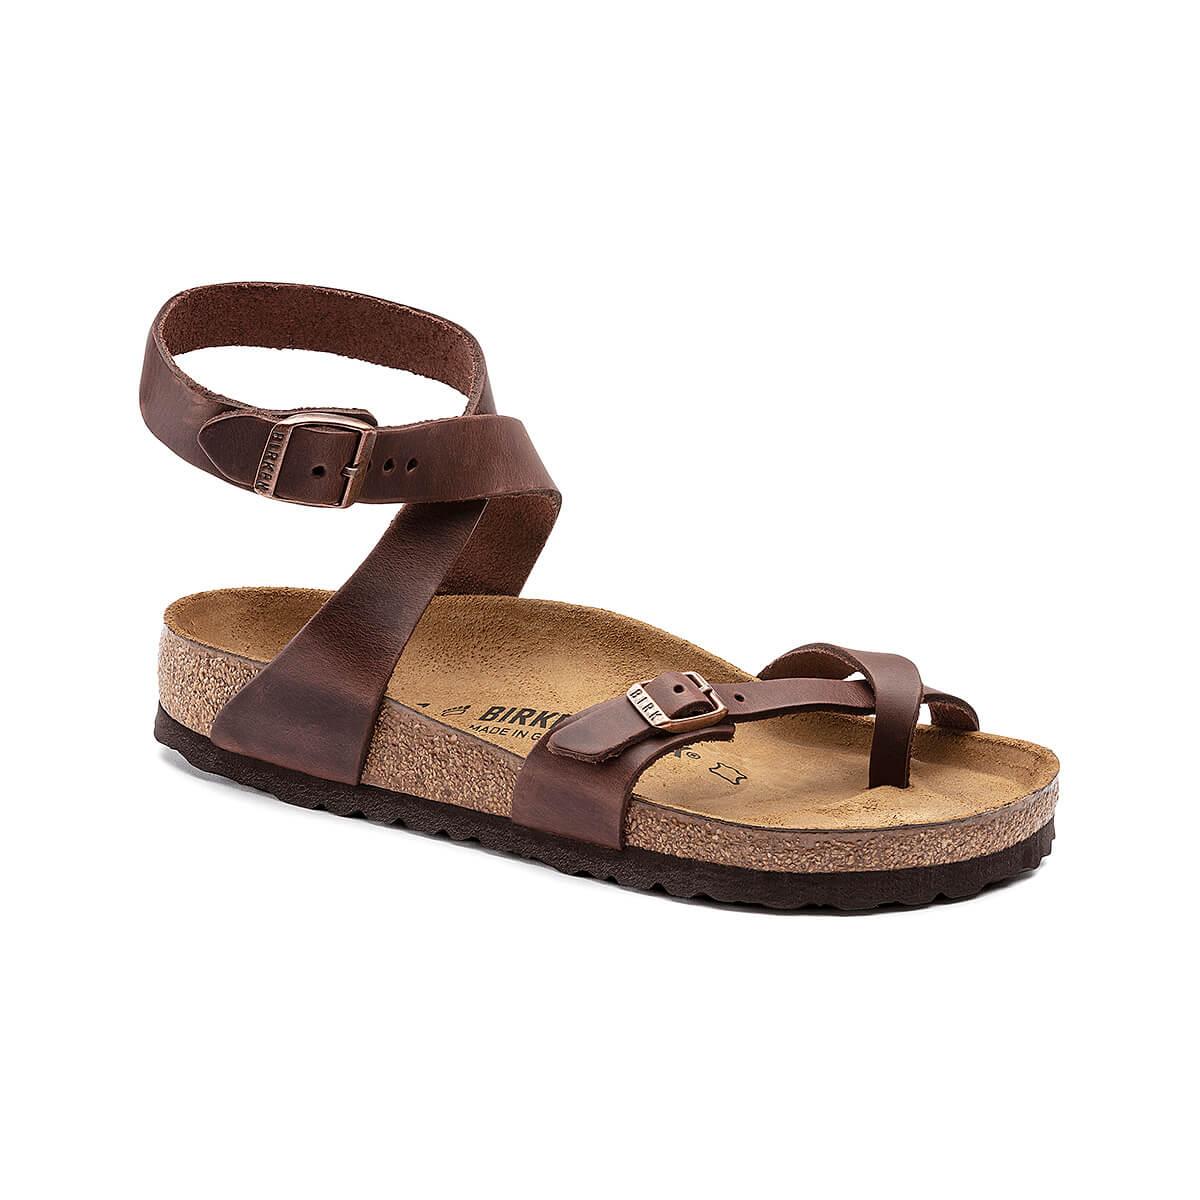  Women's Yara Oiled Leather Sandals